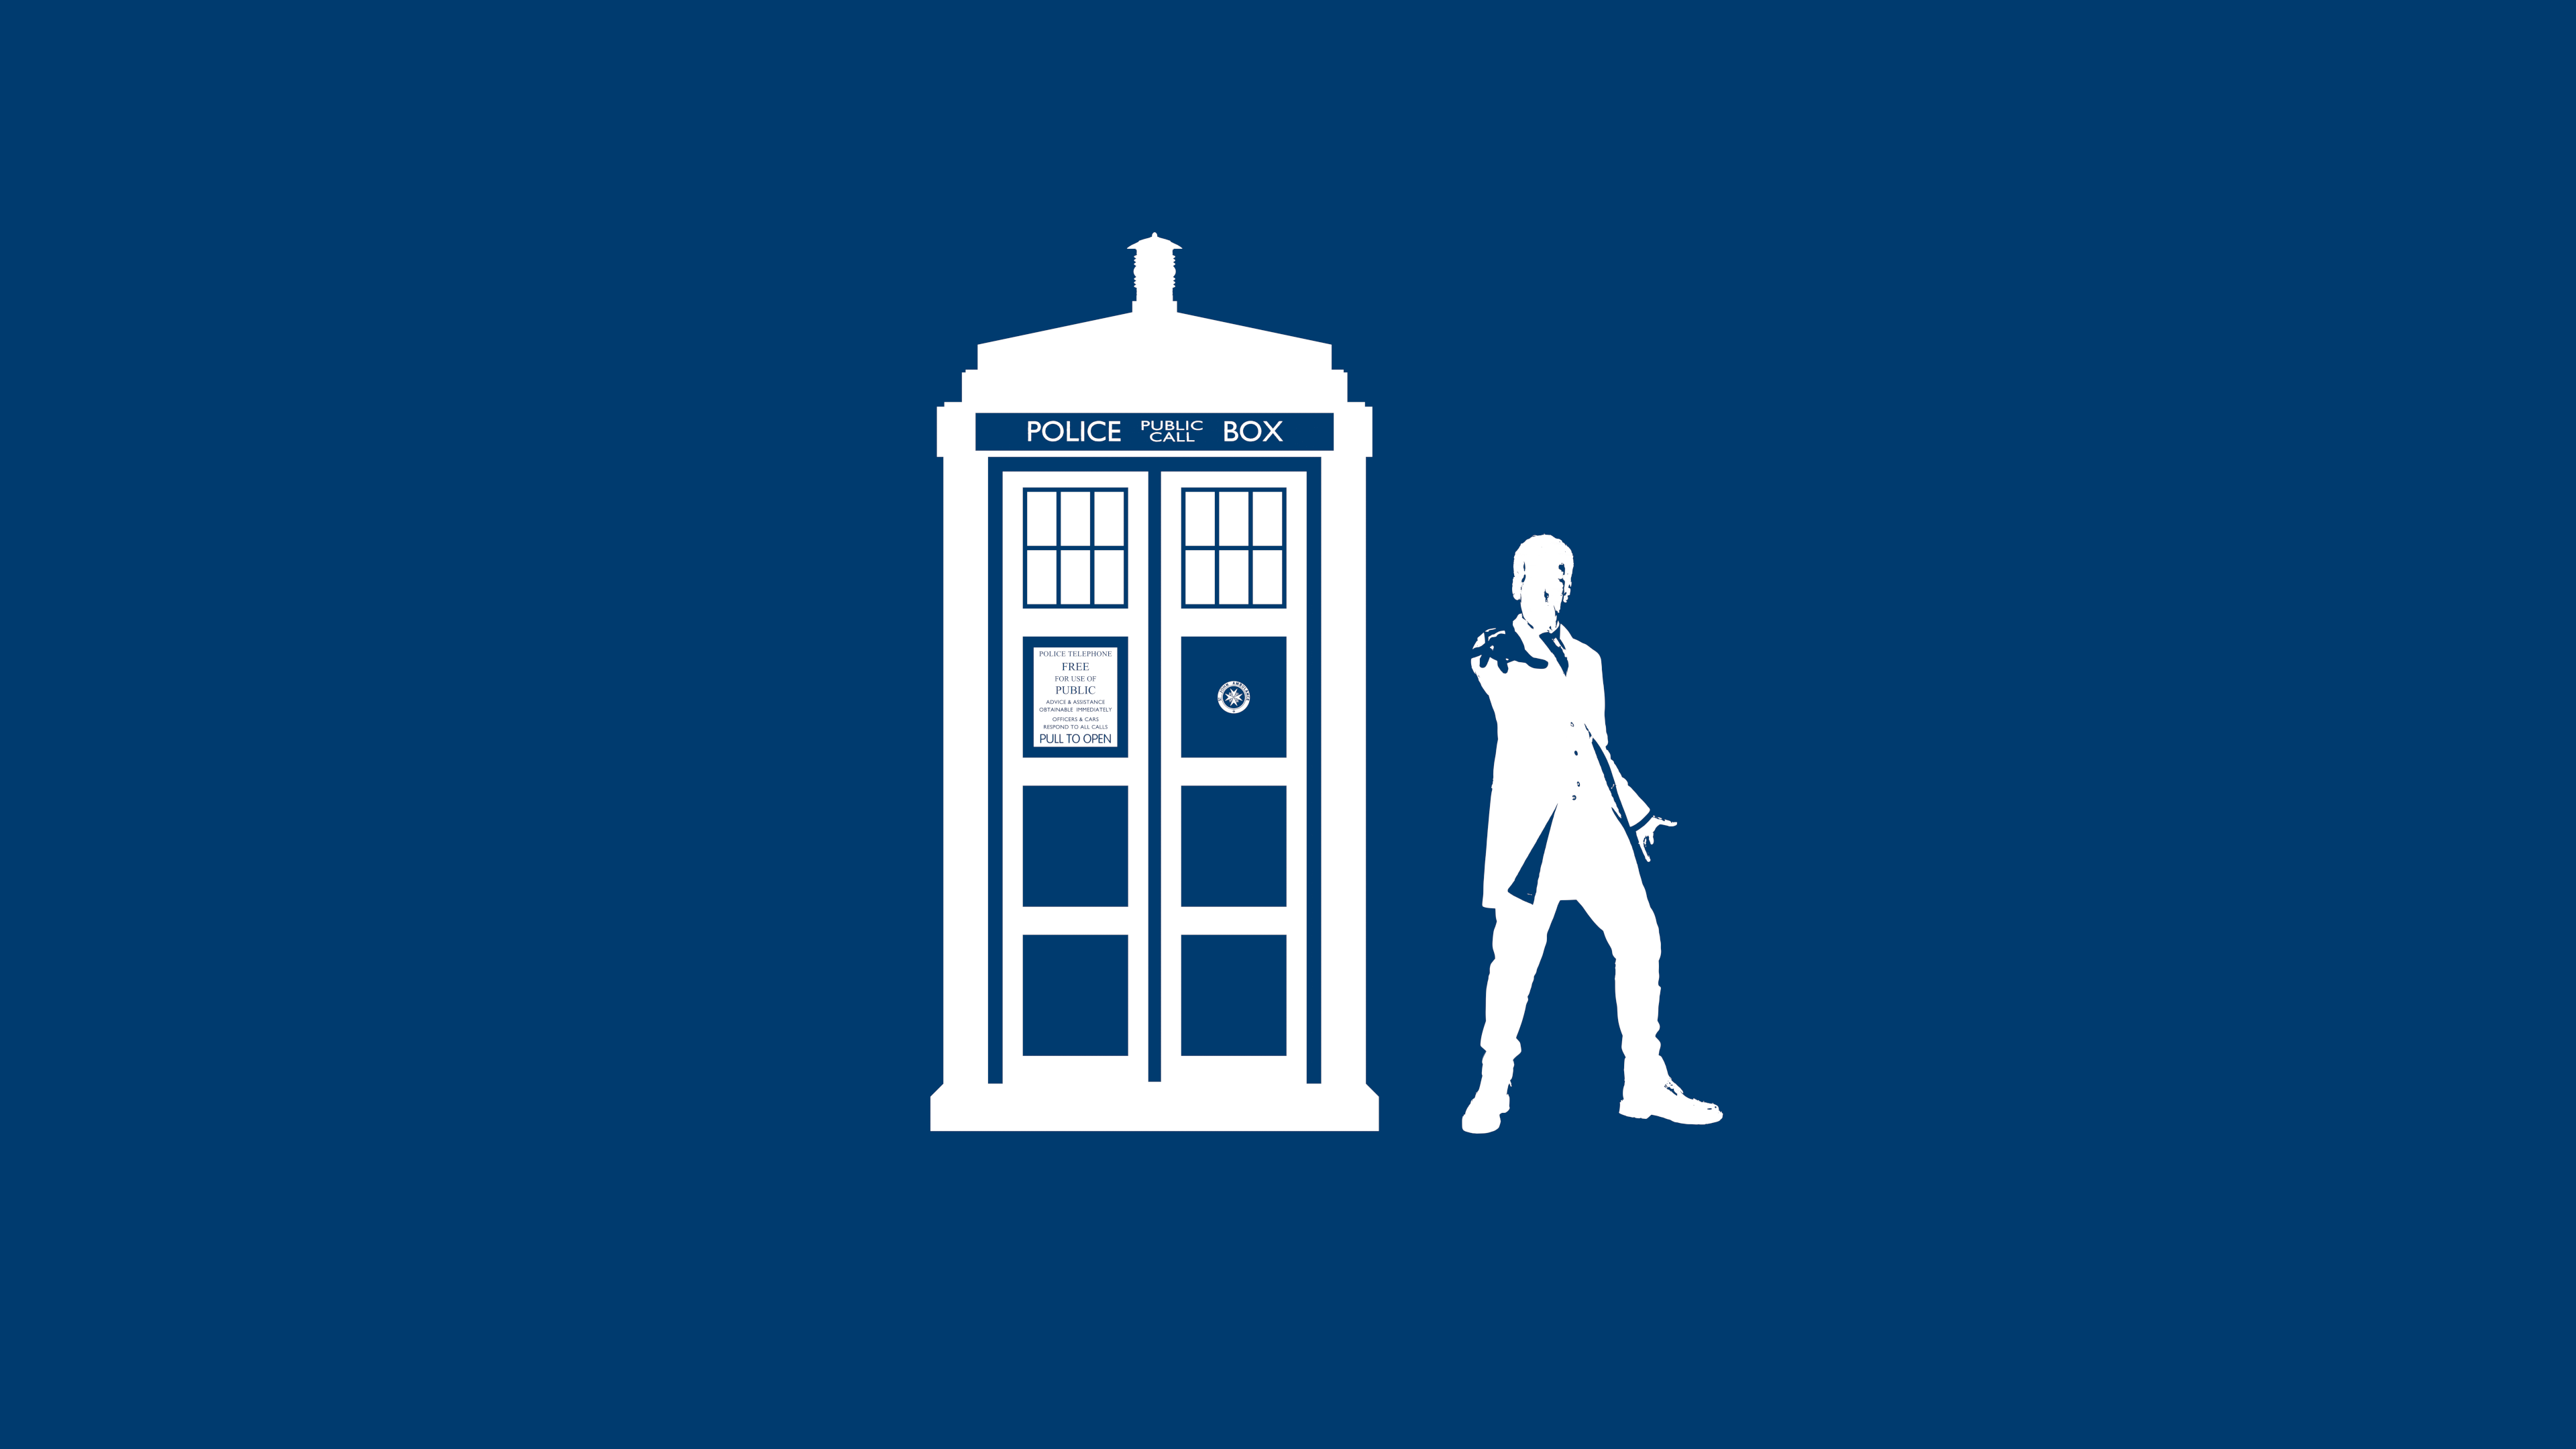 General 3840x2160 Doctor Who The Doctor TARDIS Peter Capaldi simple background TV series blue background Science Fiction Men science fiction